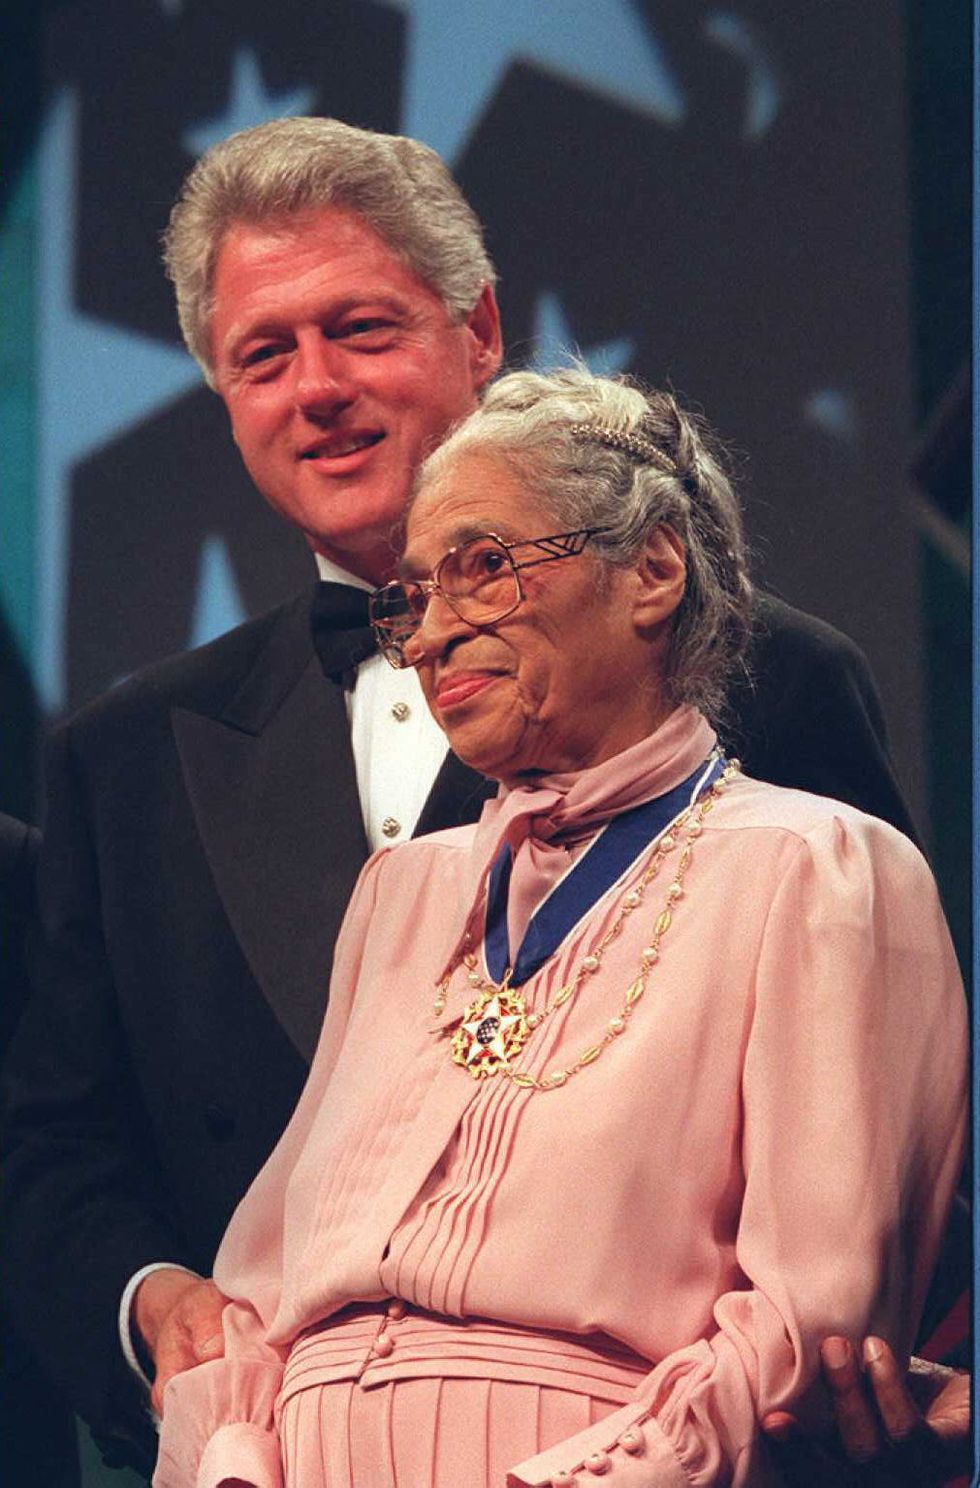 Bill Clinton with Rosa Parks during the Congressional Black Caucus dinner on September 15, 1996, in Washington, D.C.